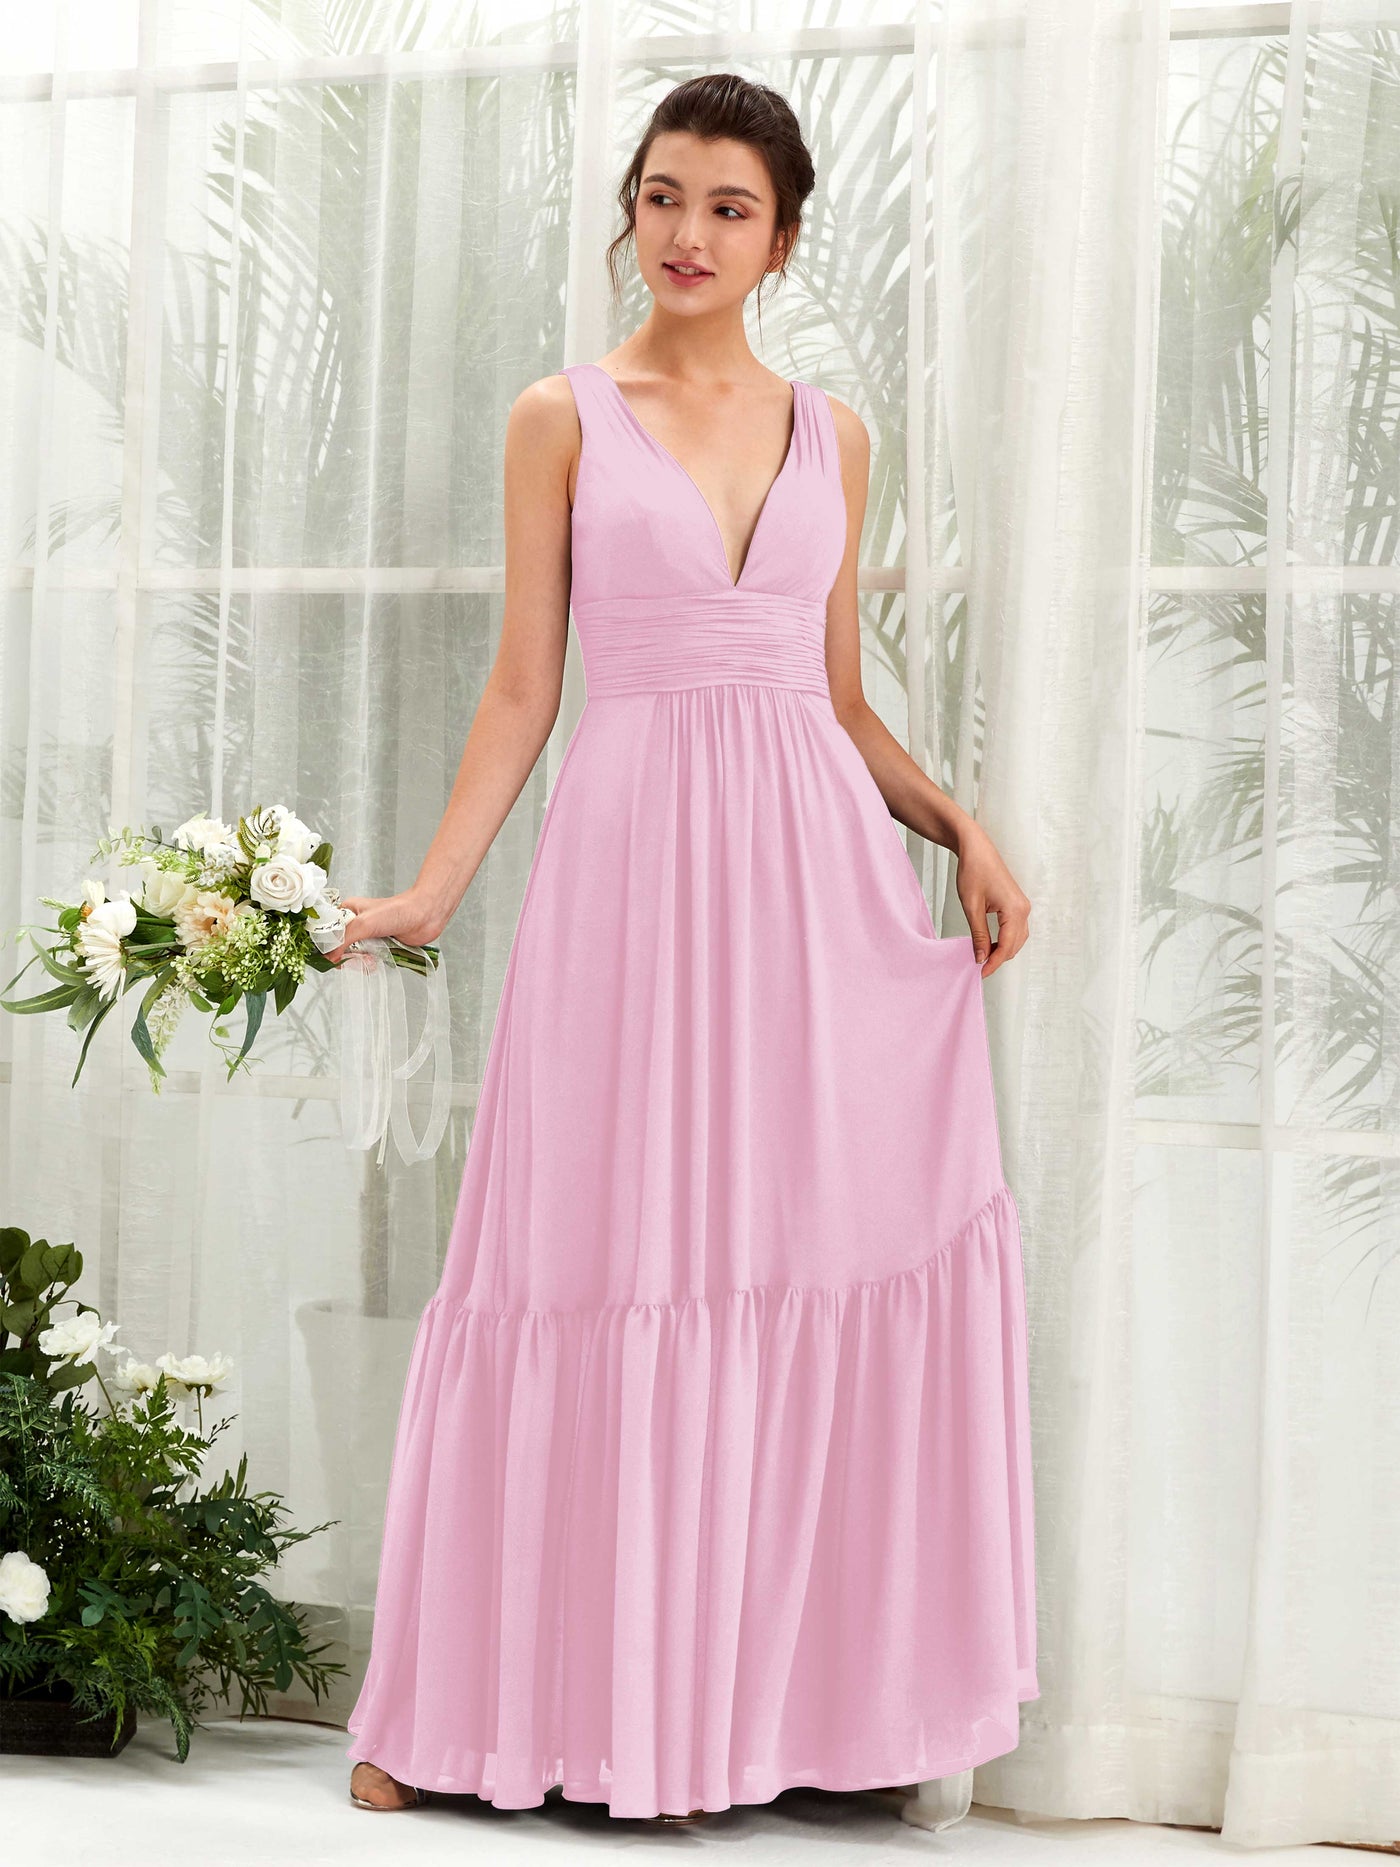 Candy Pink Bridesmaid Dresses Bridesmaid Dress A-line Chiffon Straps Full Length Sleeveless Wedding Party Dress (80223739)#color_candy-pink